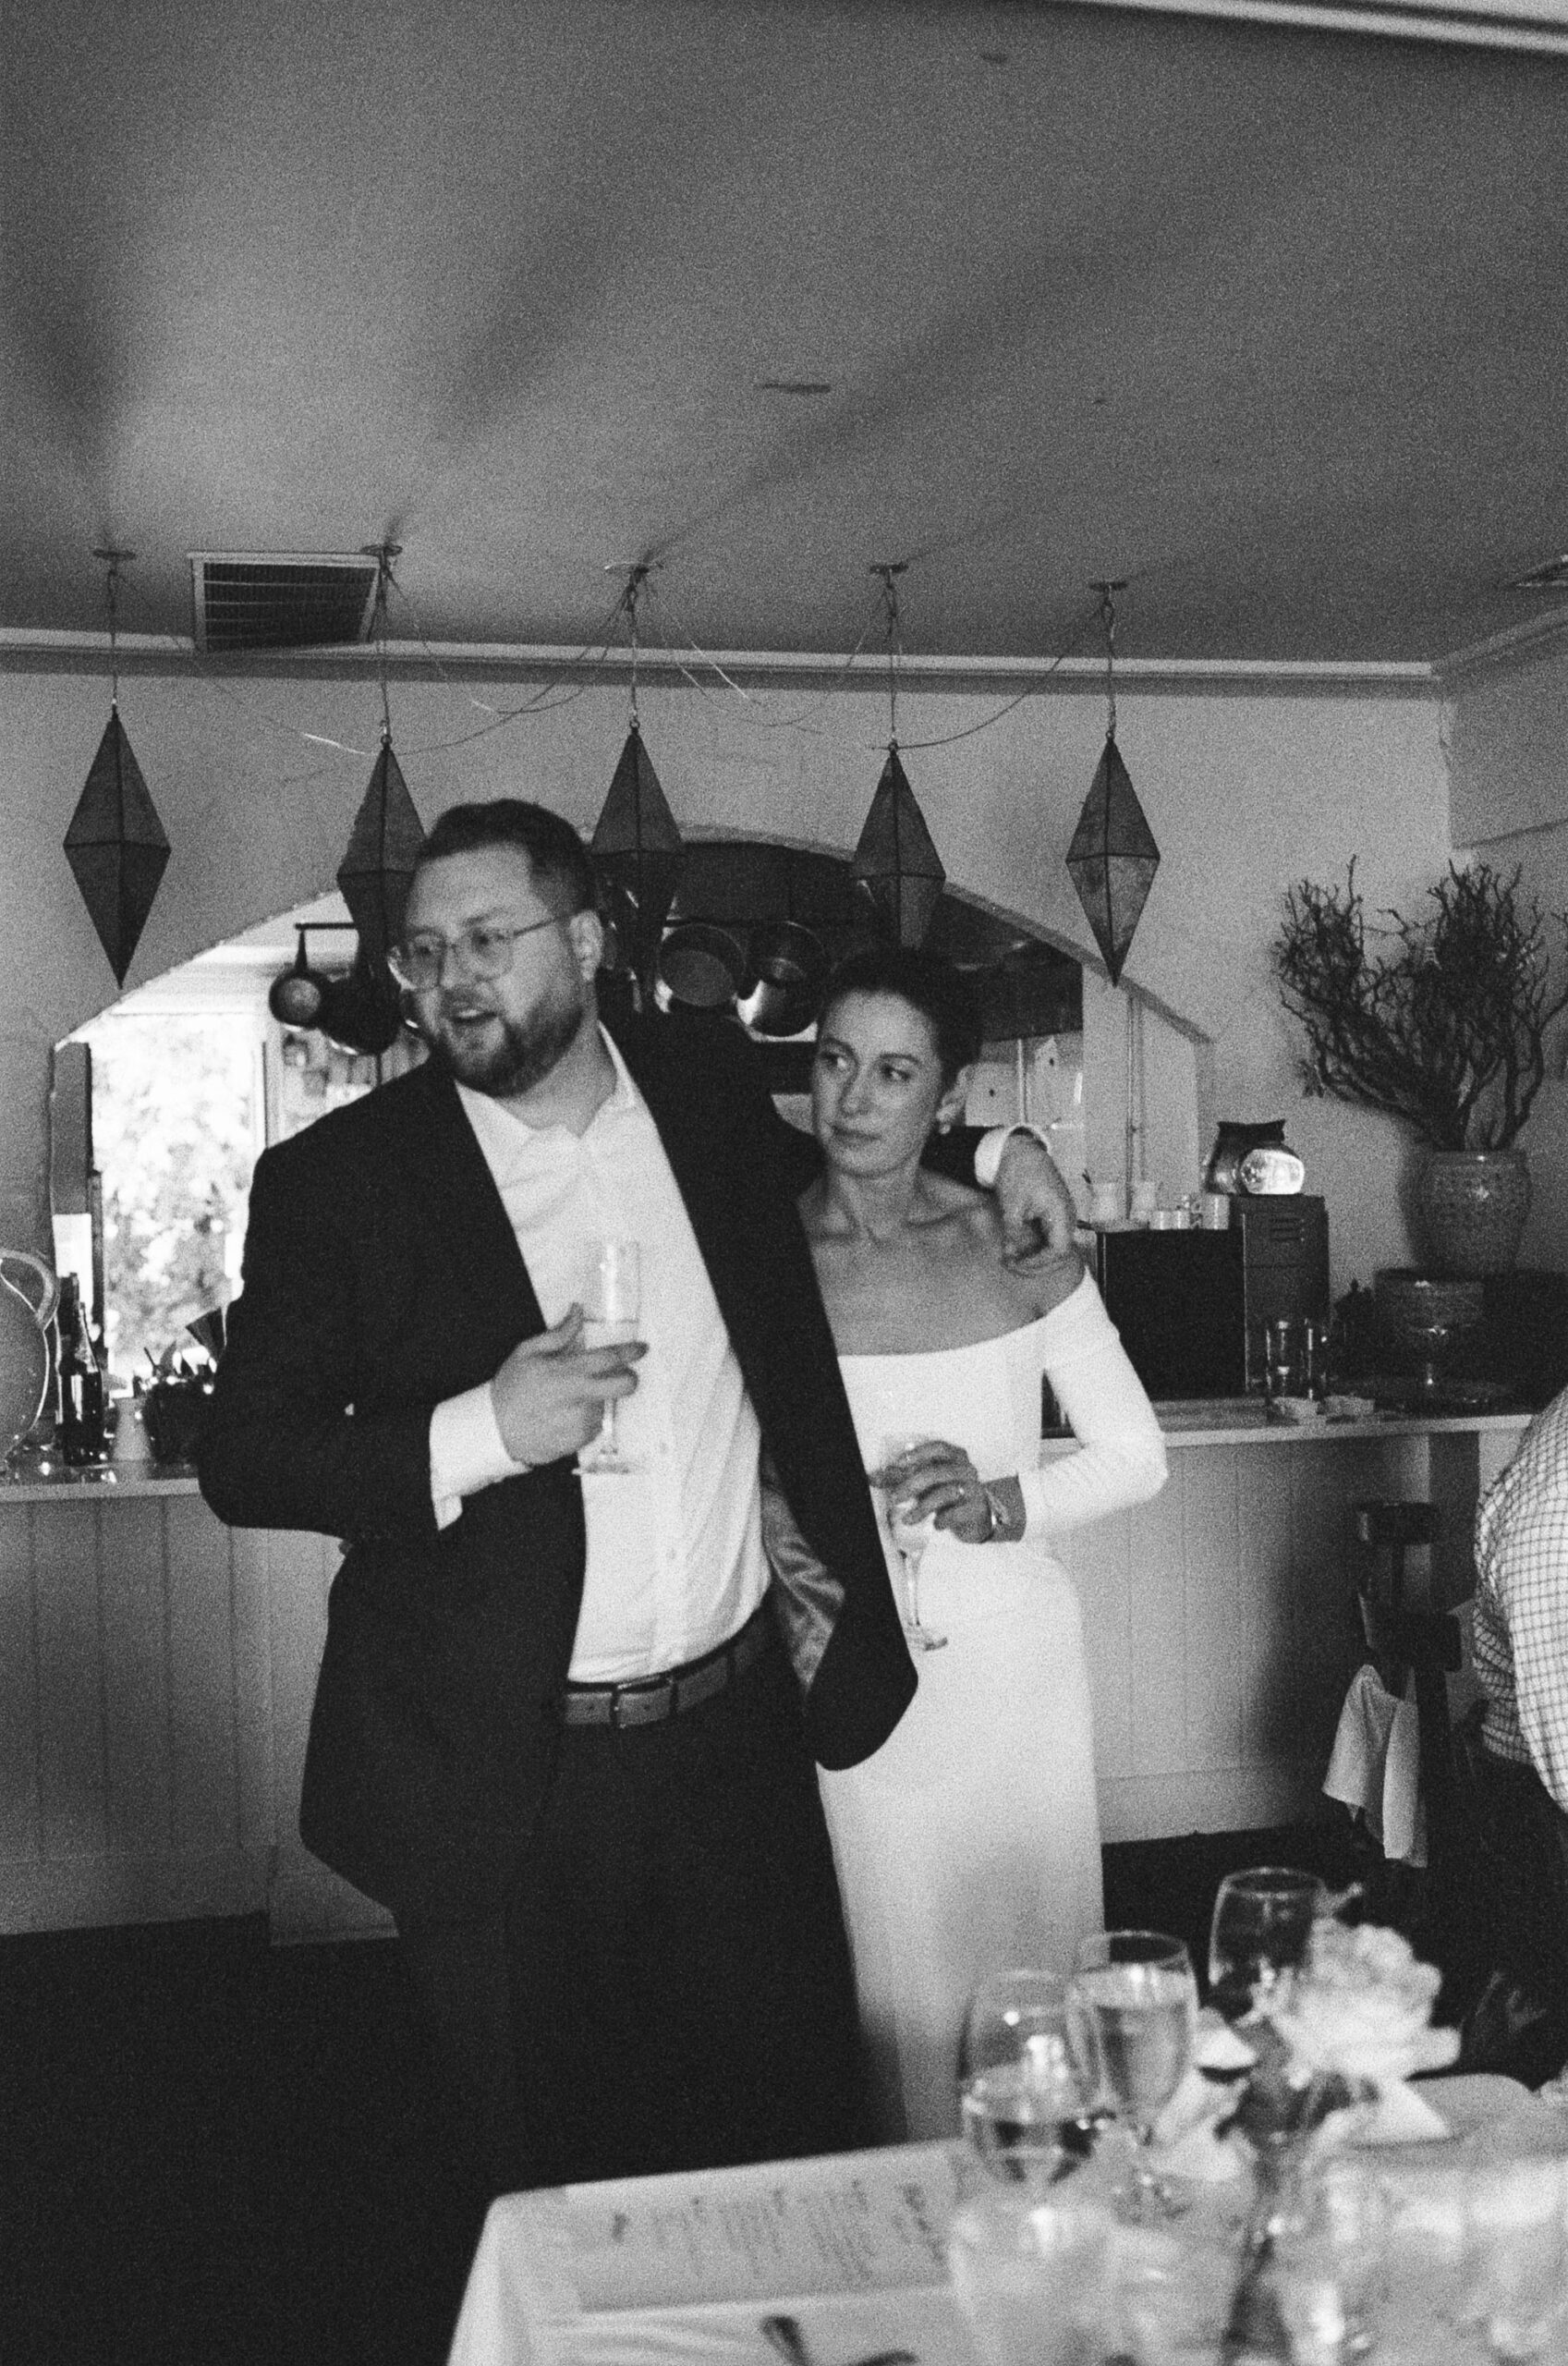 black and white photo on 35mm film of groom with arm around the bride giving an impromptu toast at an intimate wedding reception at Brian's restaurant in Lambertville, NJ